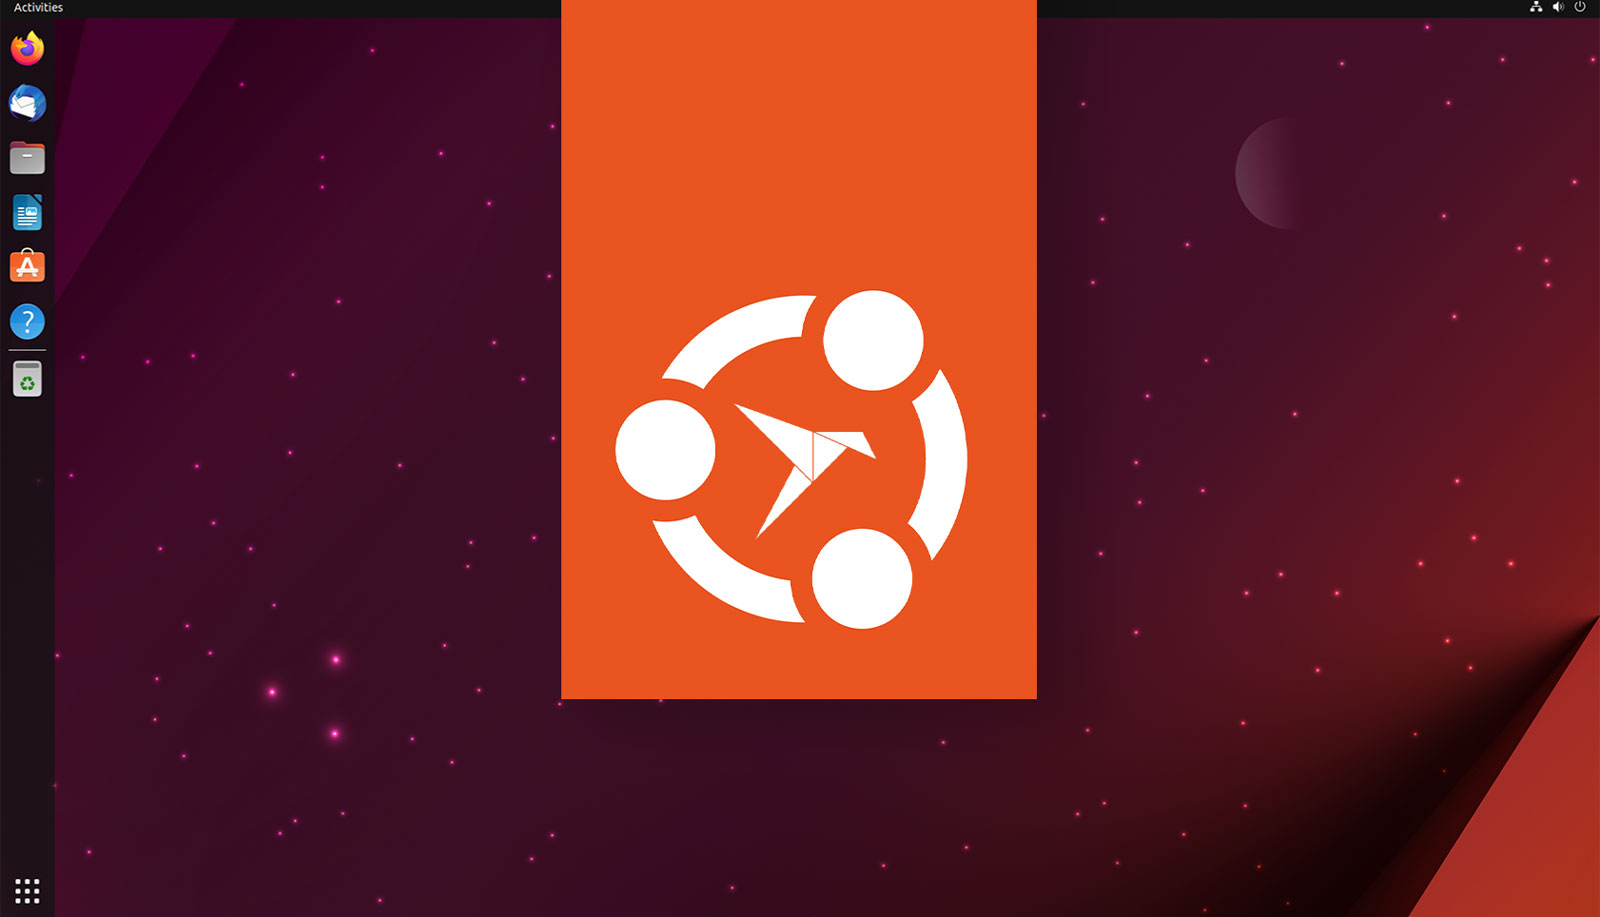 According to Canonical’s Oliver Grawert, the next long-term support release of Ubuntu will be available to download in 2 versions: a classic, de